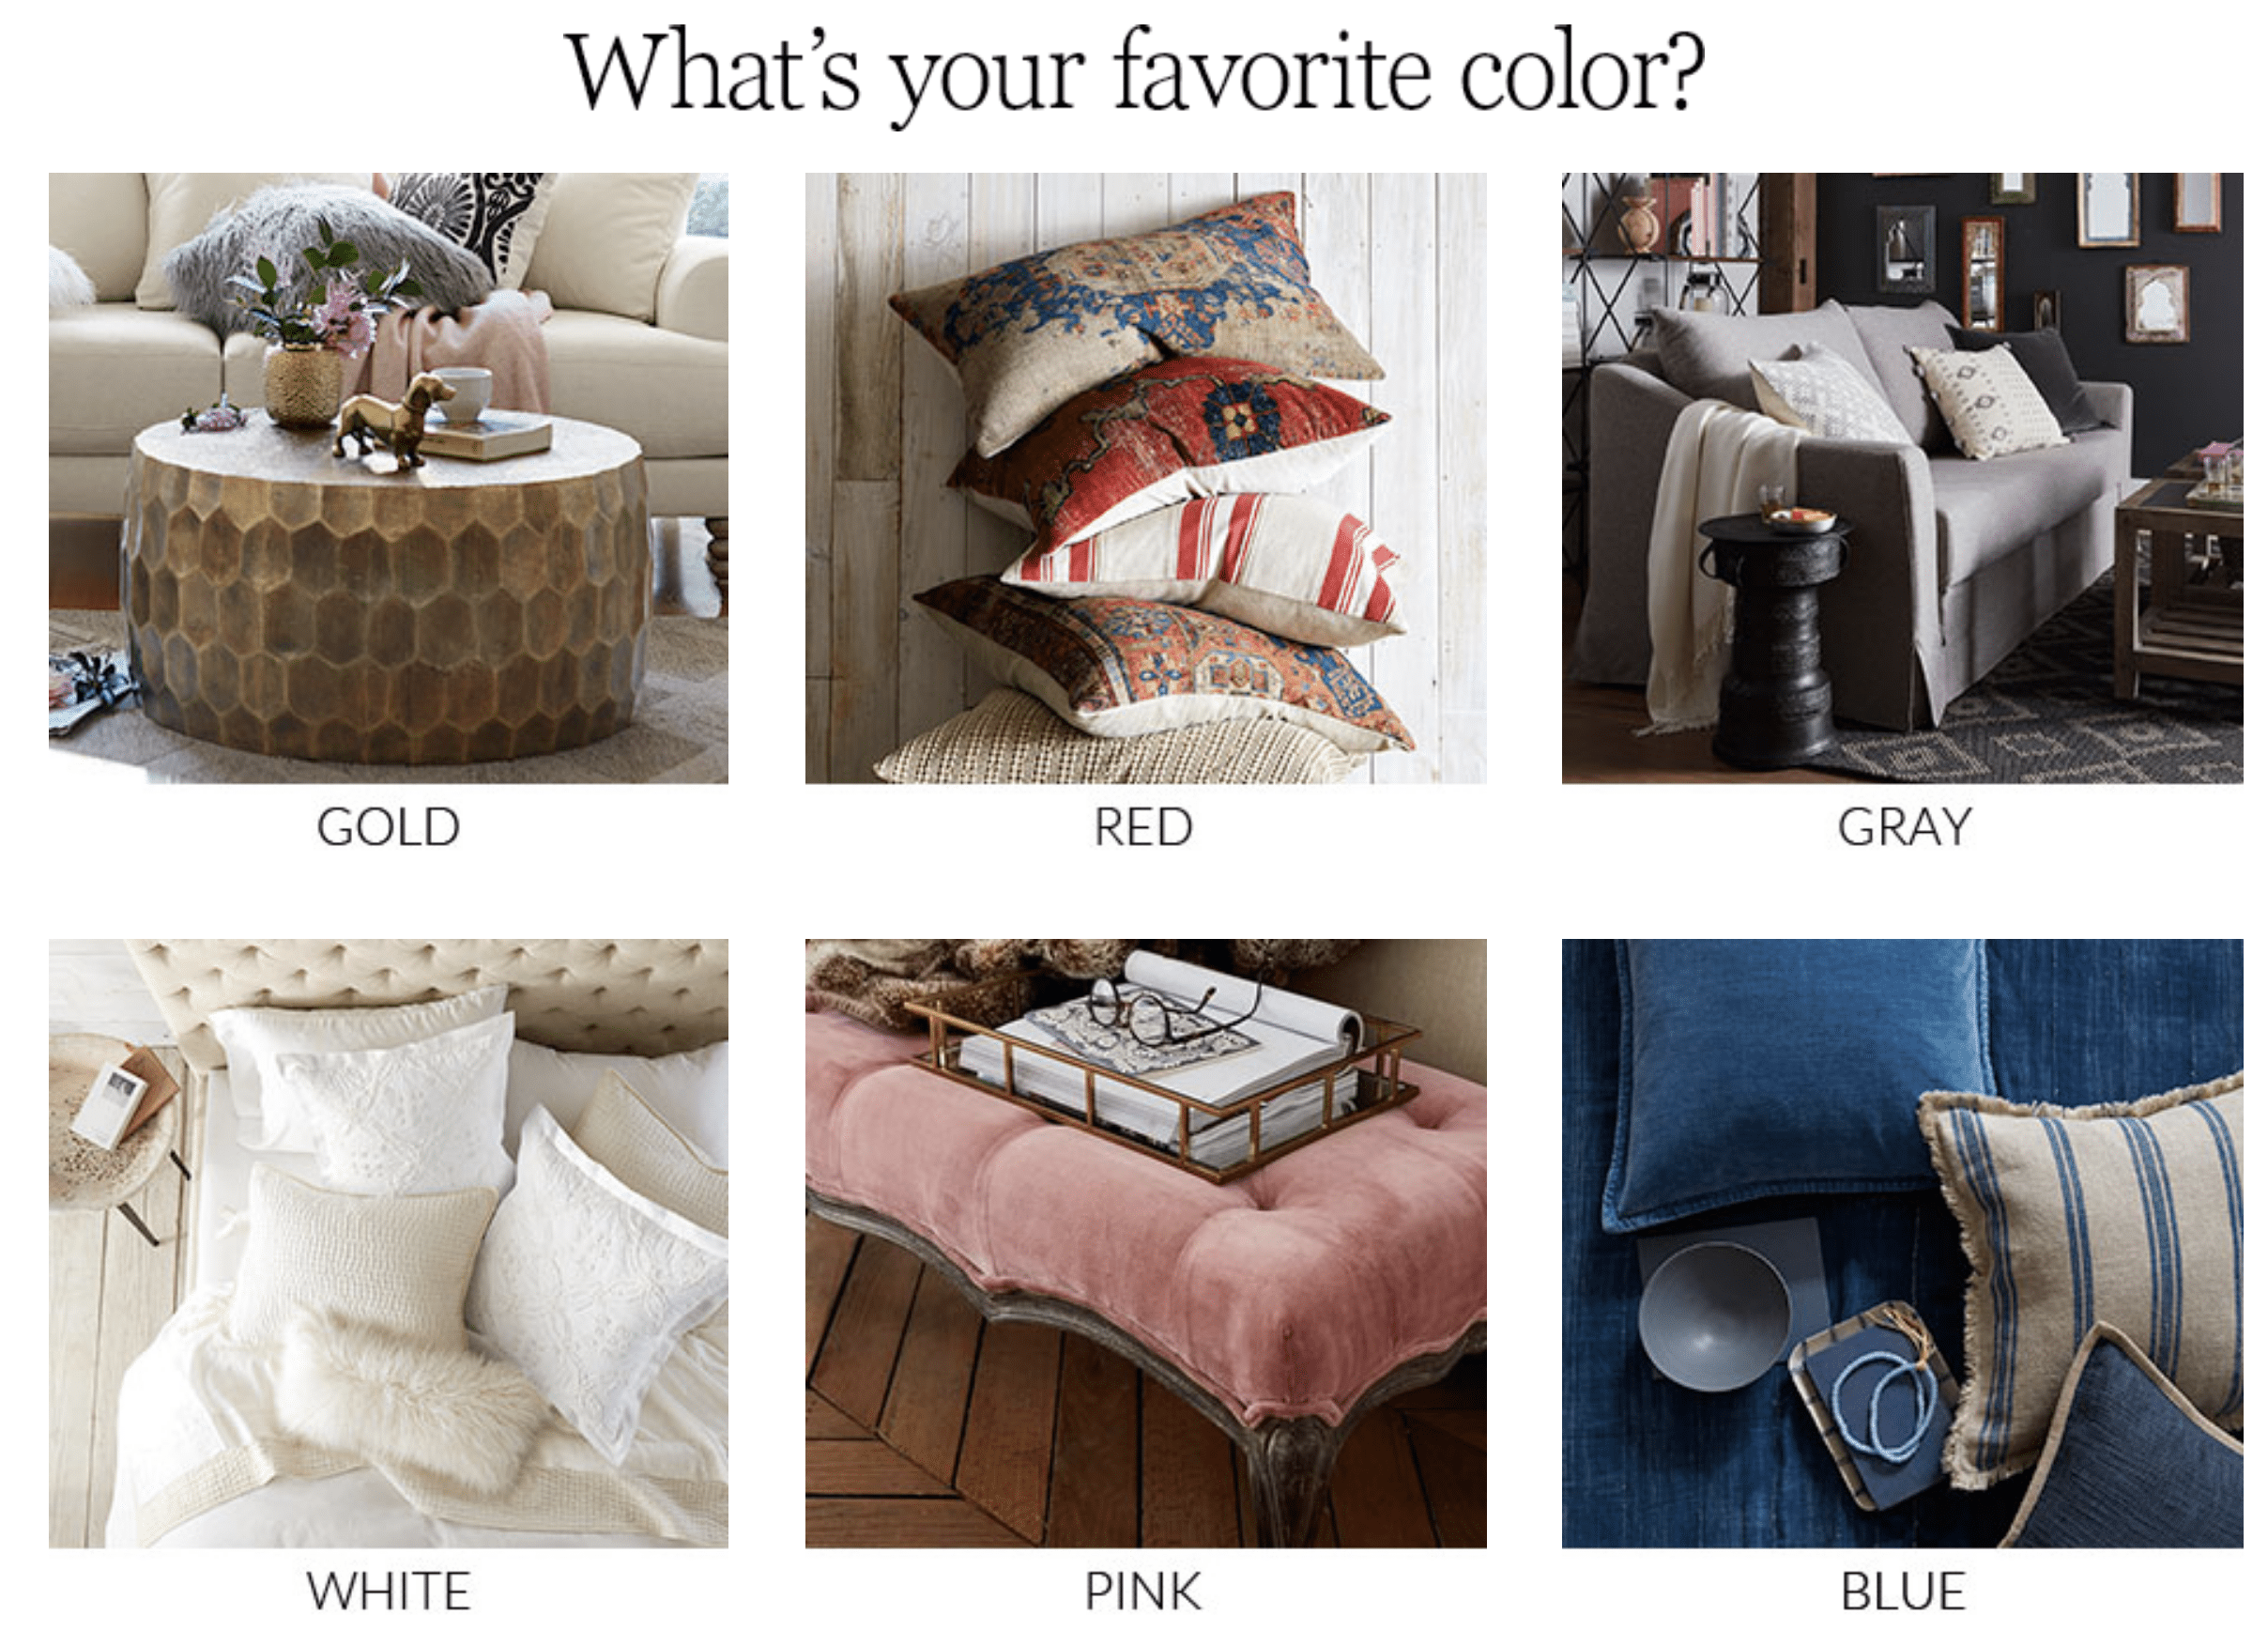 5 Home Decorating Style Quizzes That Work – Welsh Design Studio